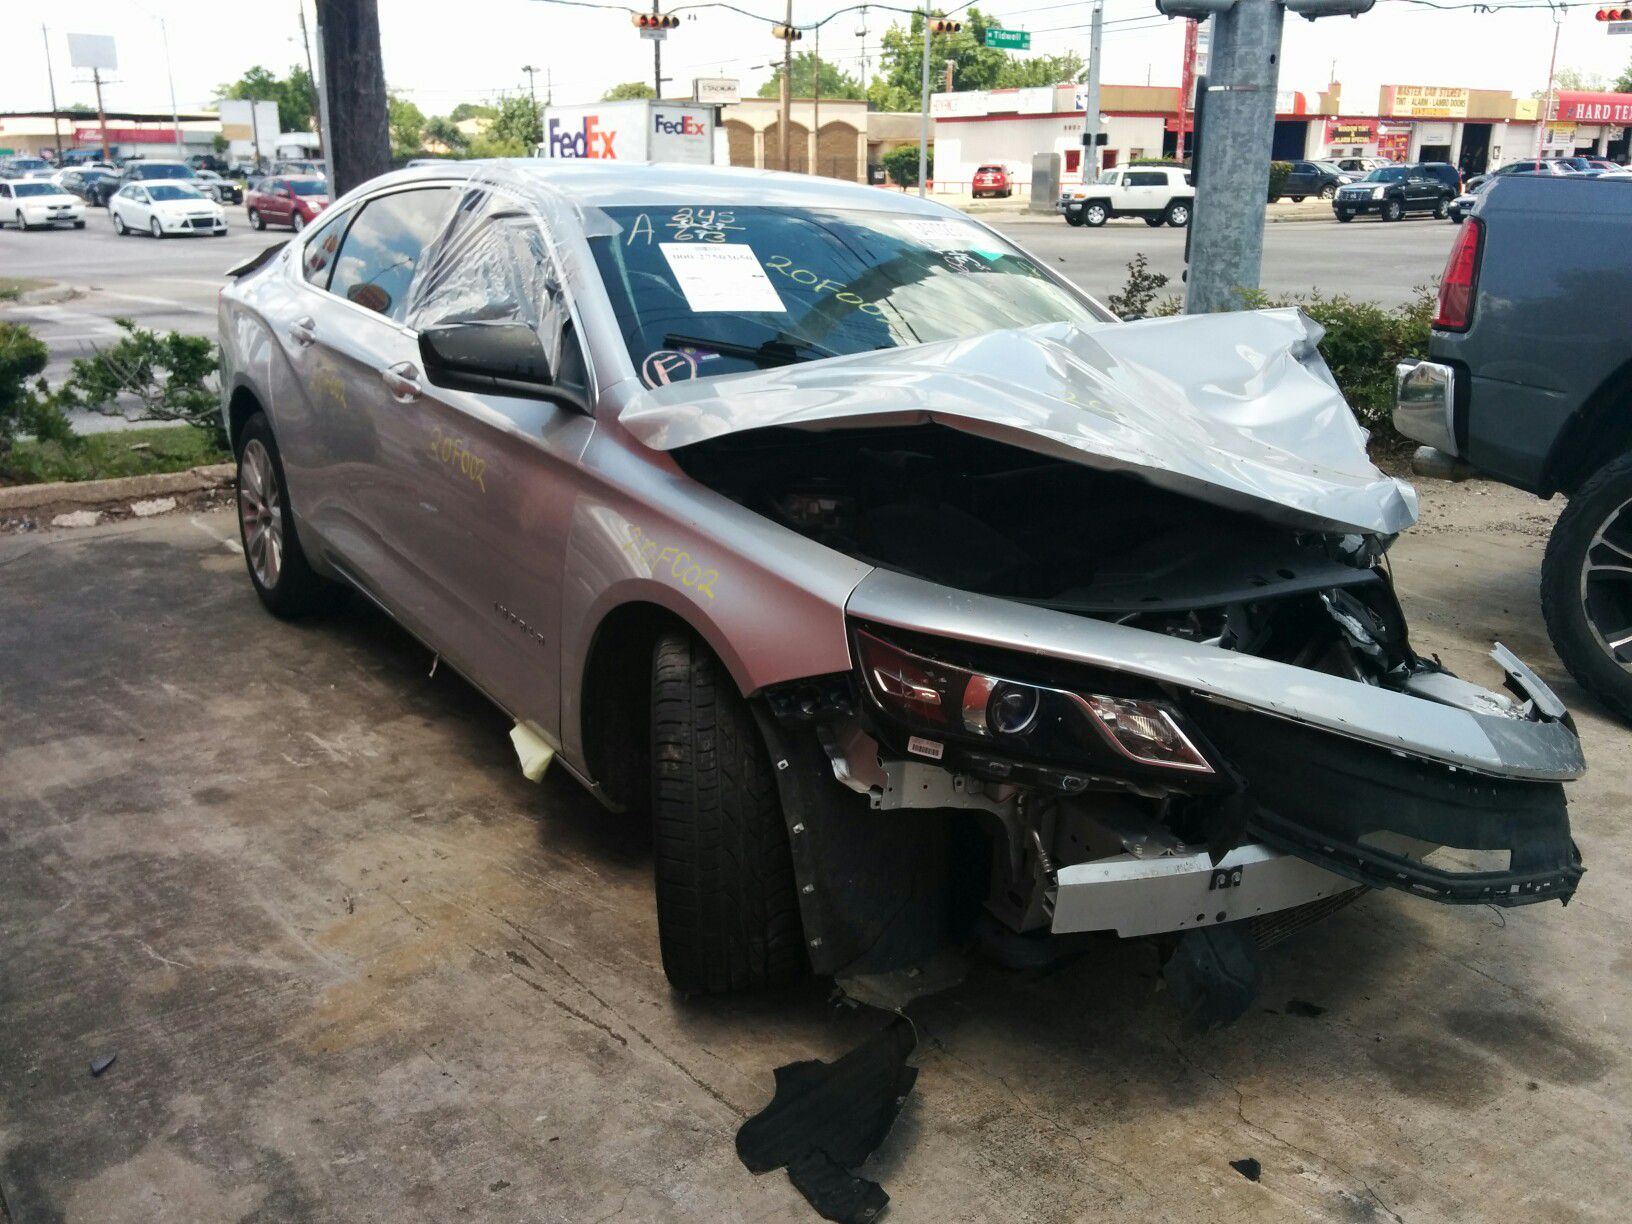 2016 Chevy Impala for parts